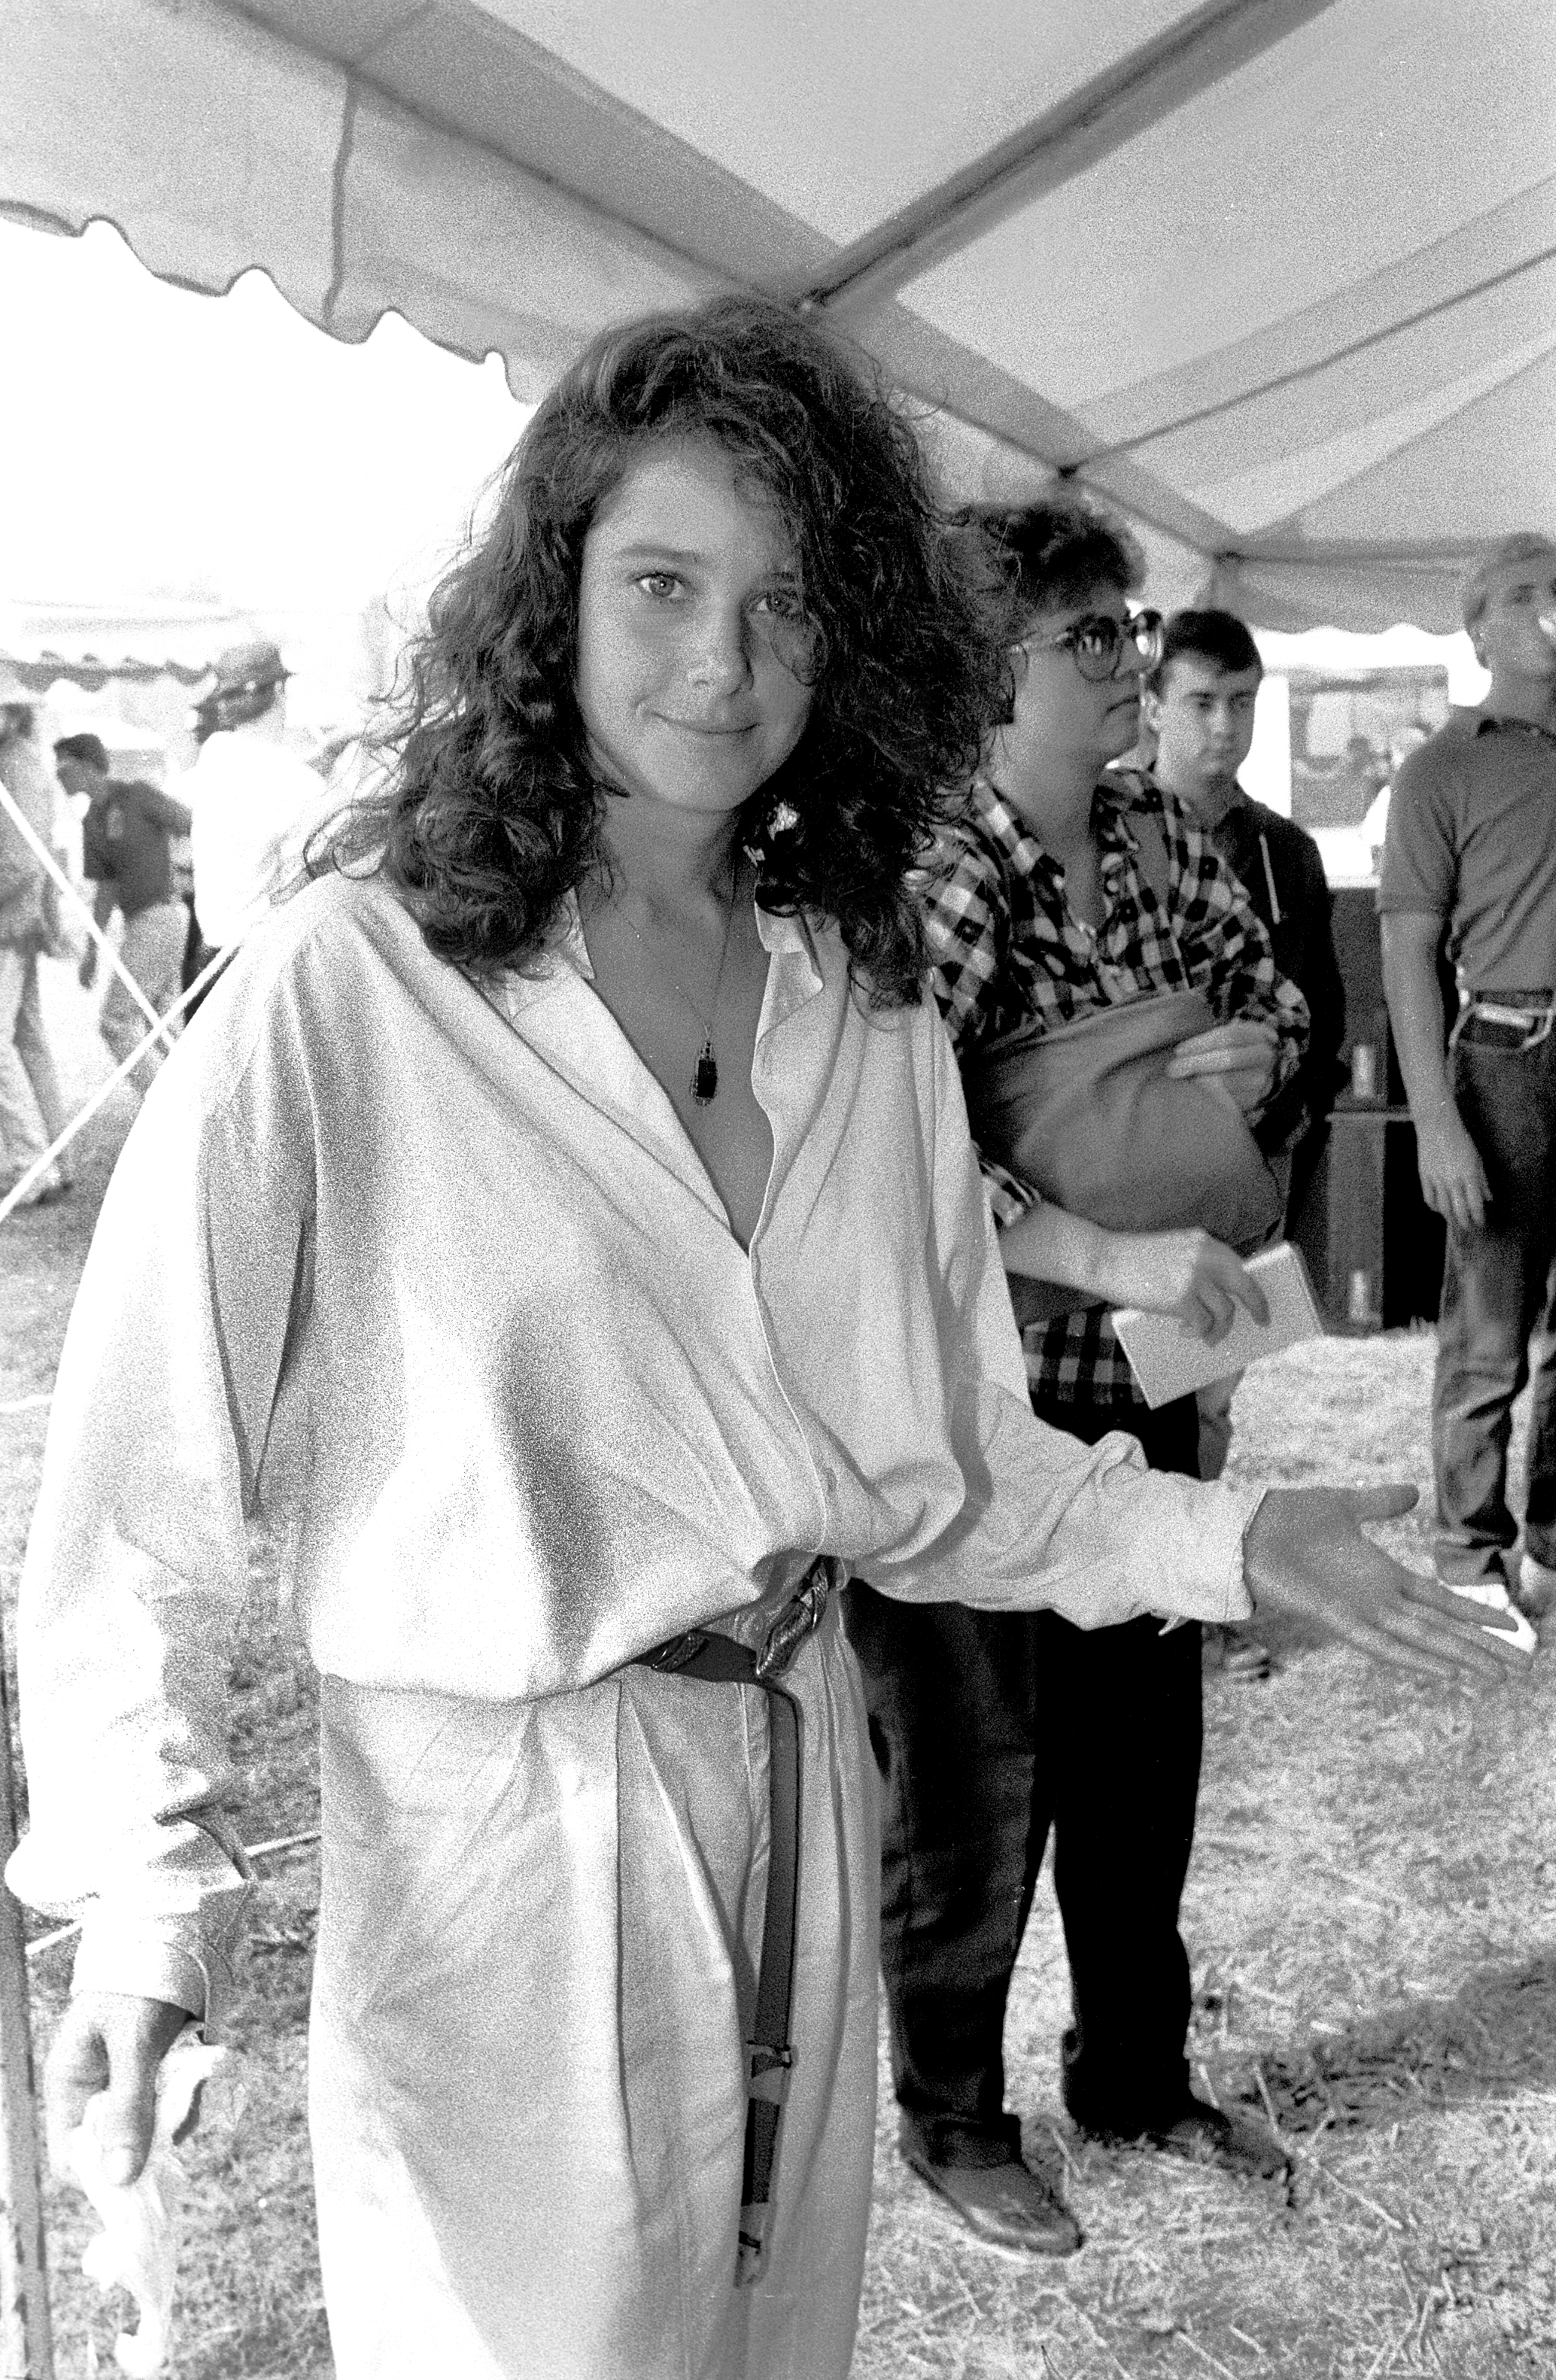 Debra Winger at the inagural Farm Aid benefit concert at Veteran's Stadium on September 22, 1985 in Champaign, Illinois. | Source: Getty Images